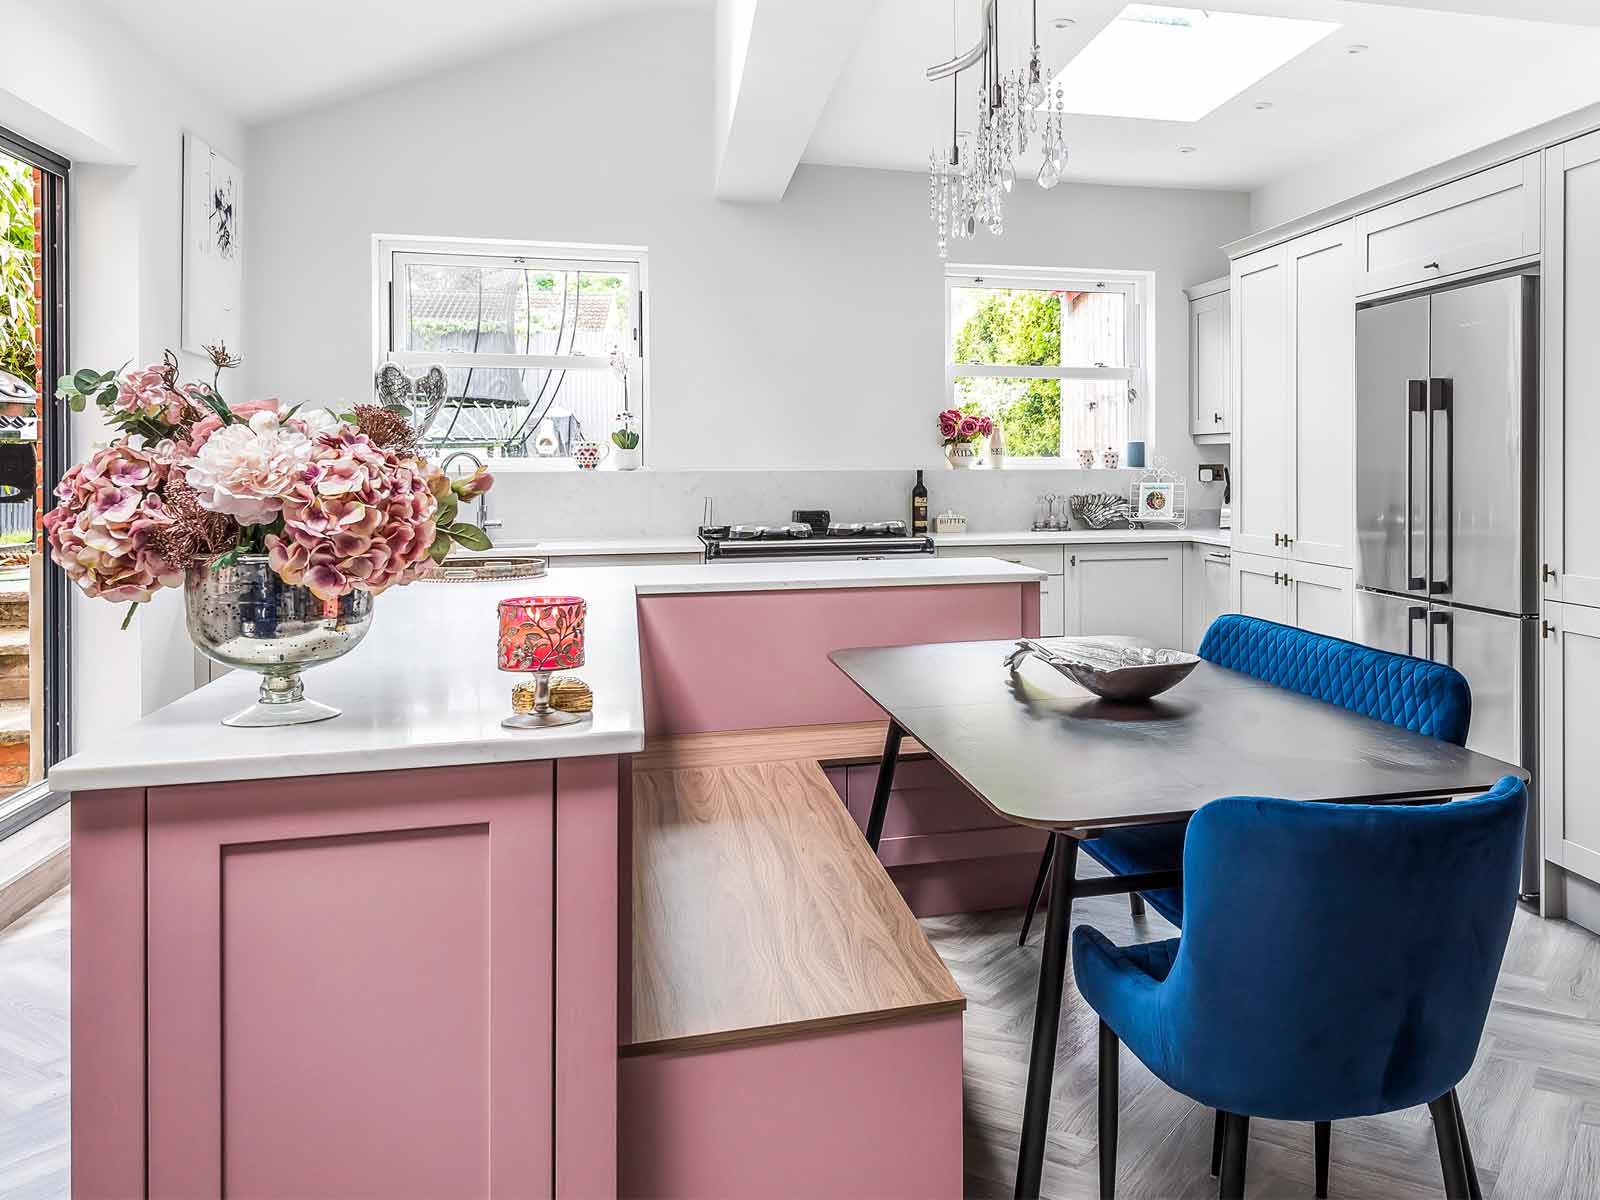 Pink kitsch kitchen cabinets with integrated seating